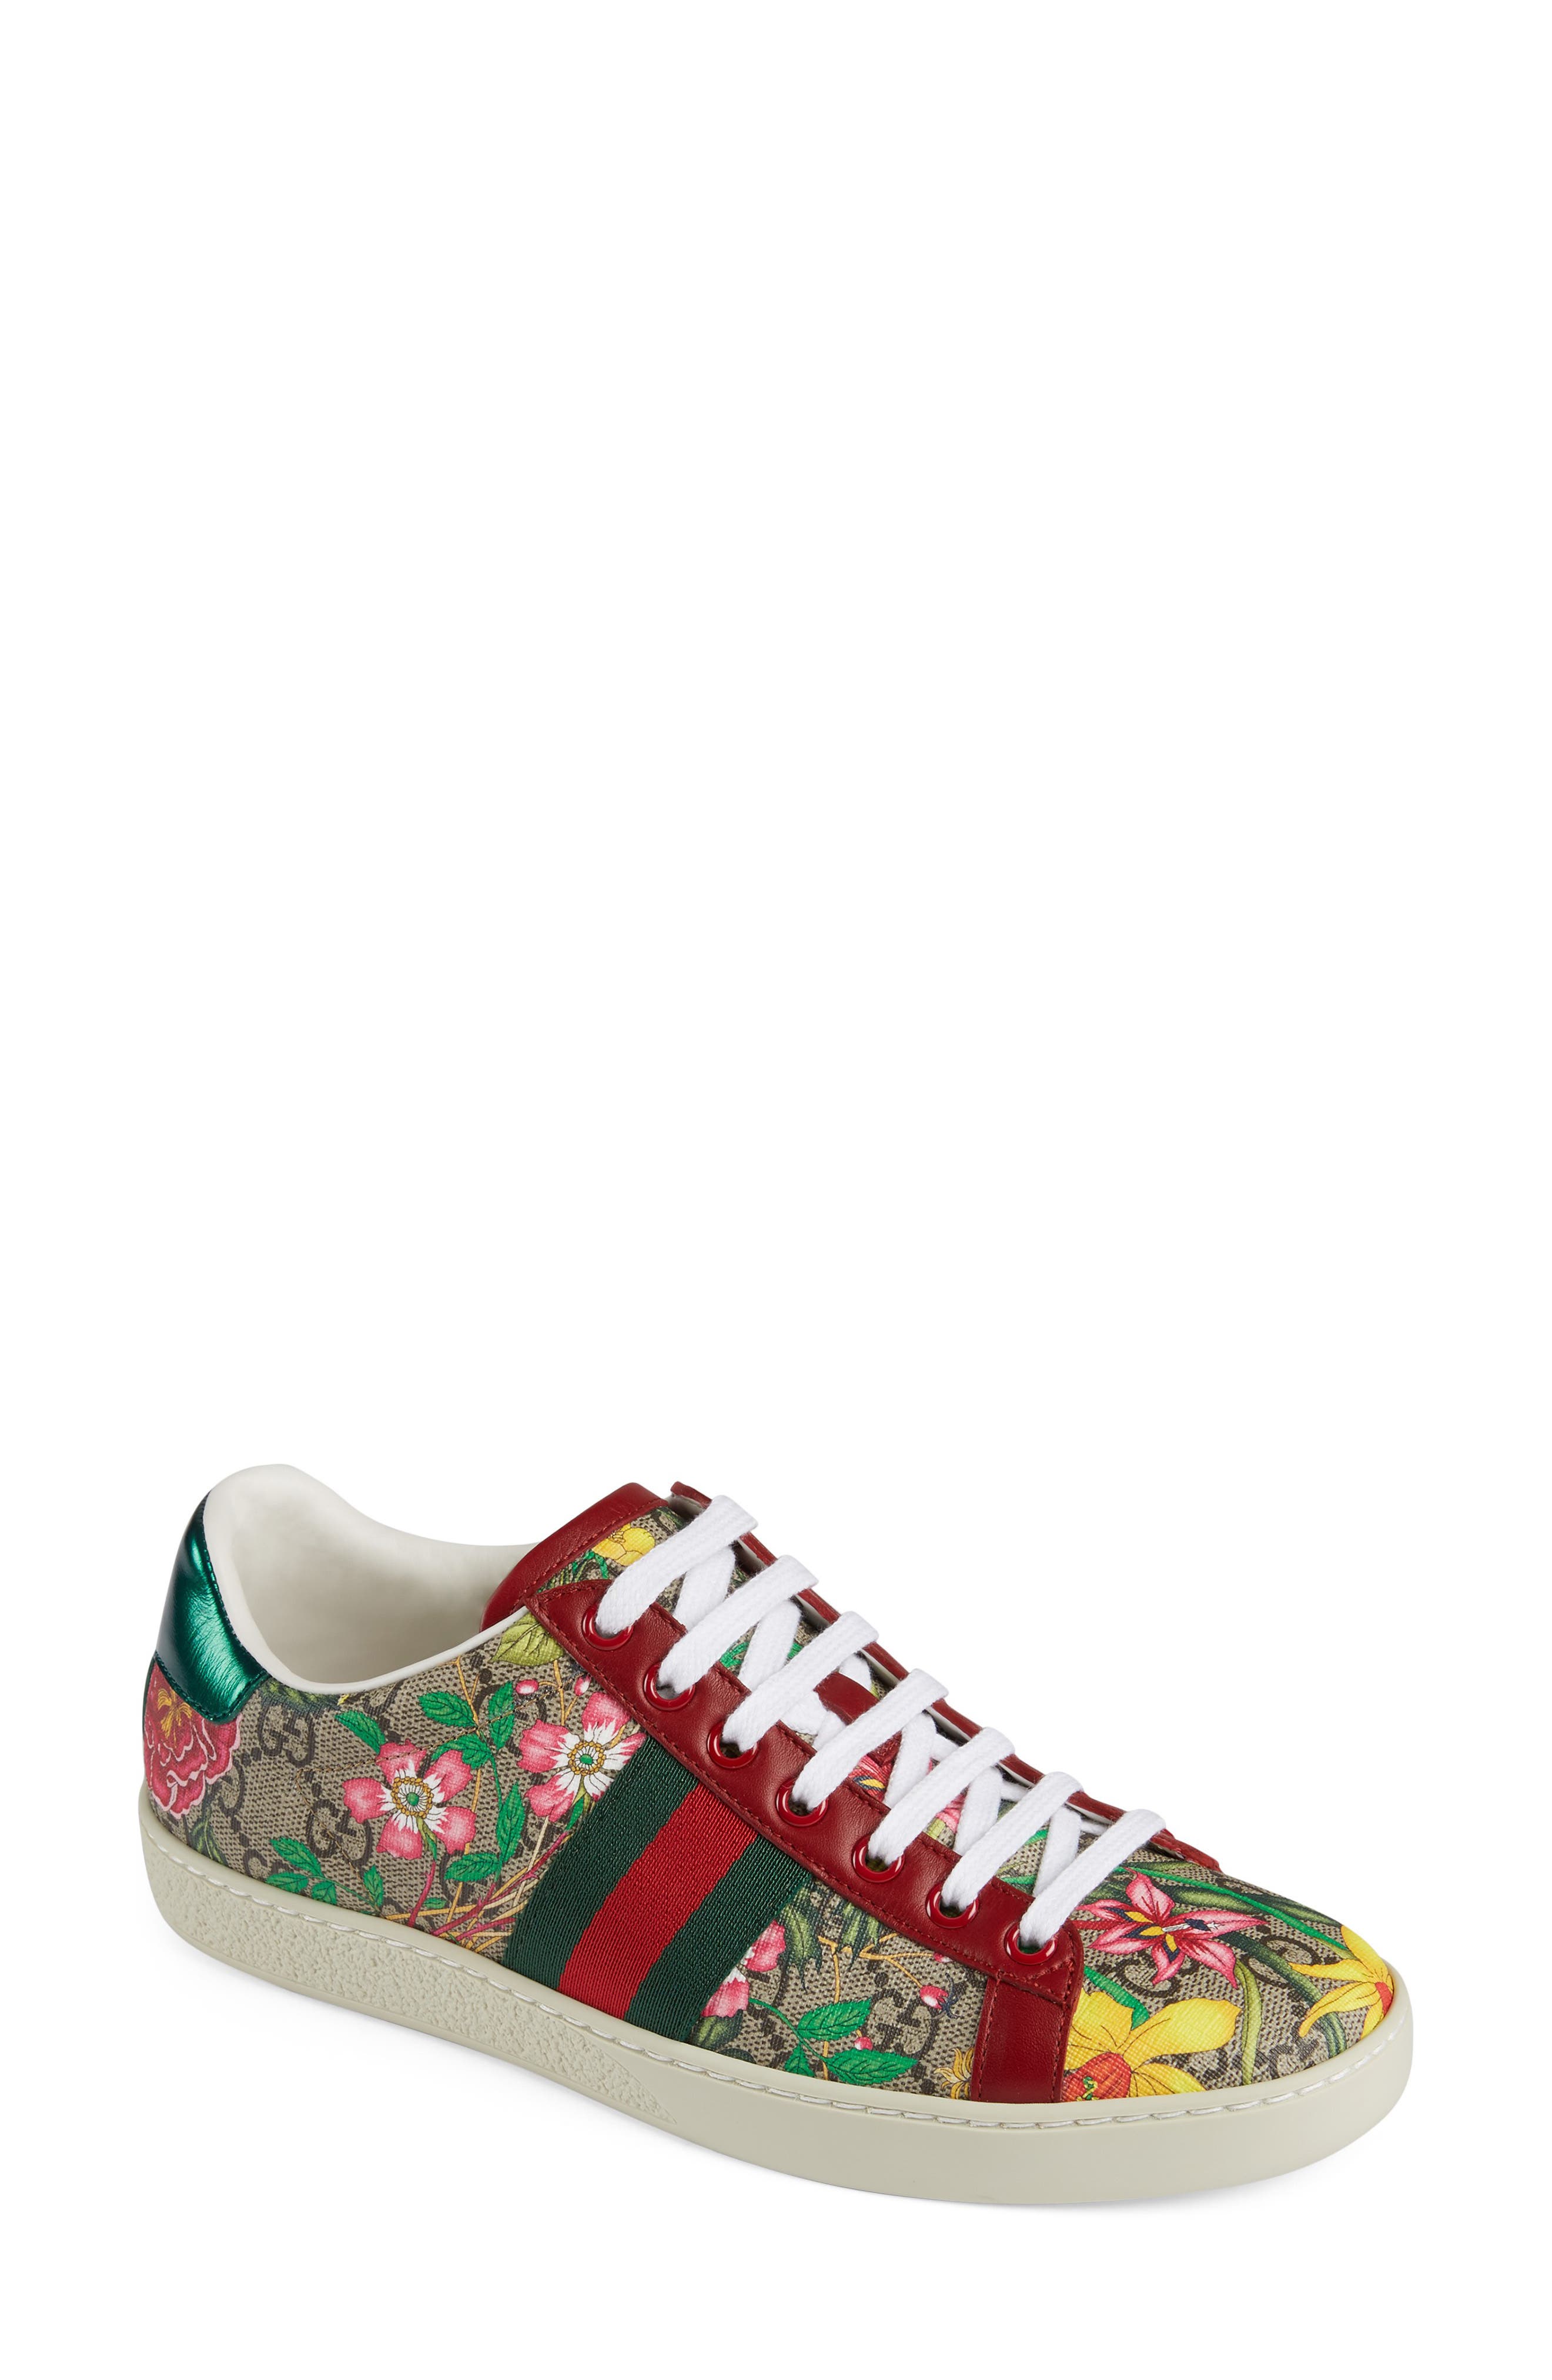 nordstrom gucci tennis shoes